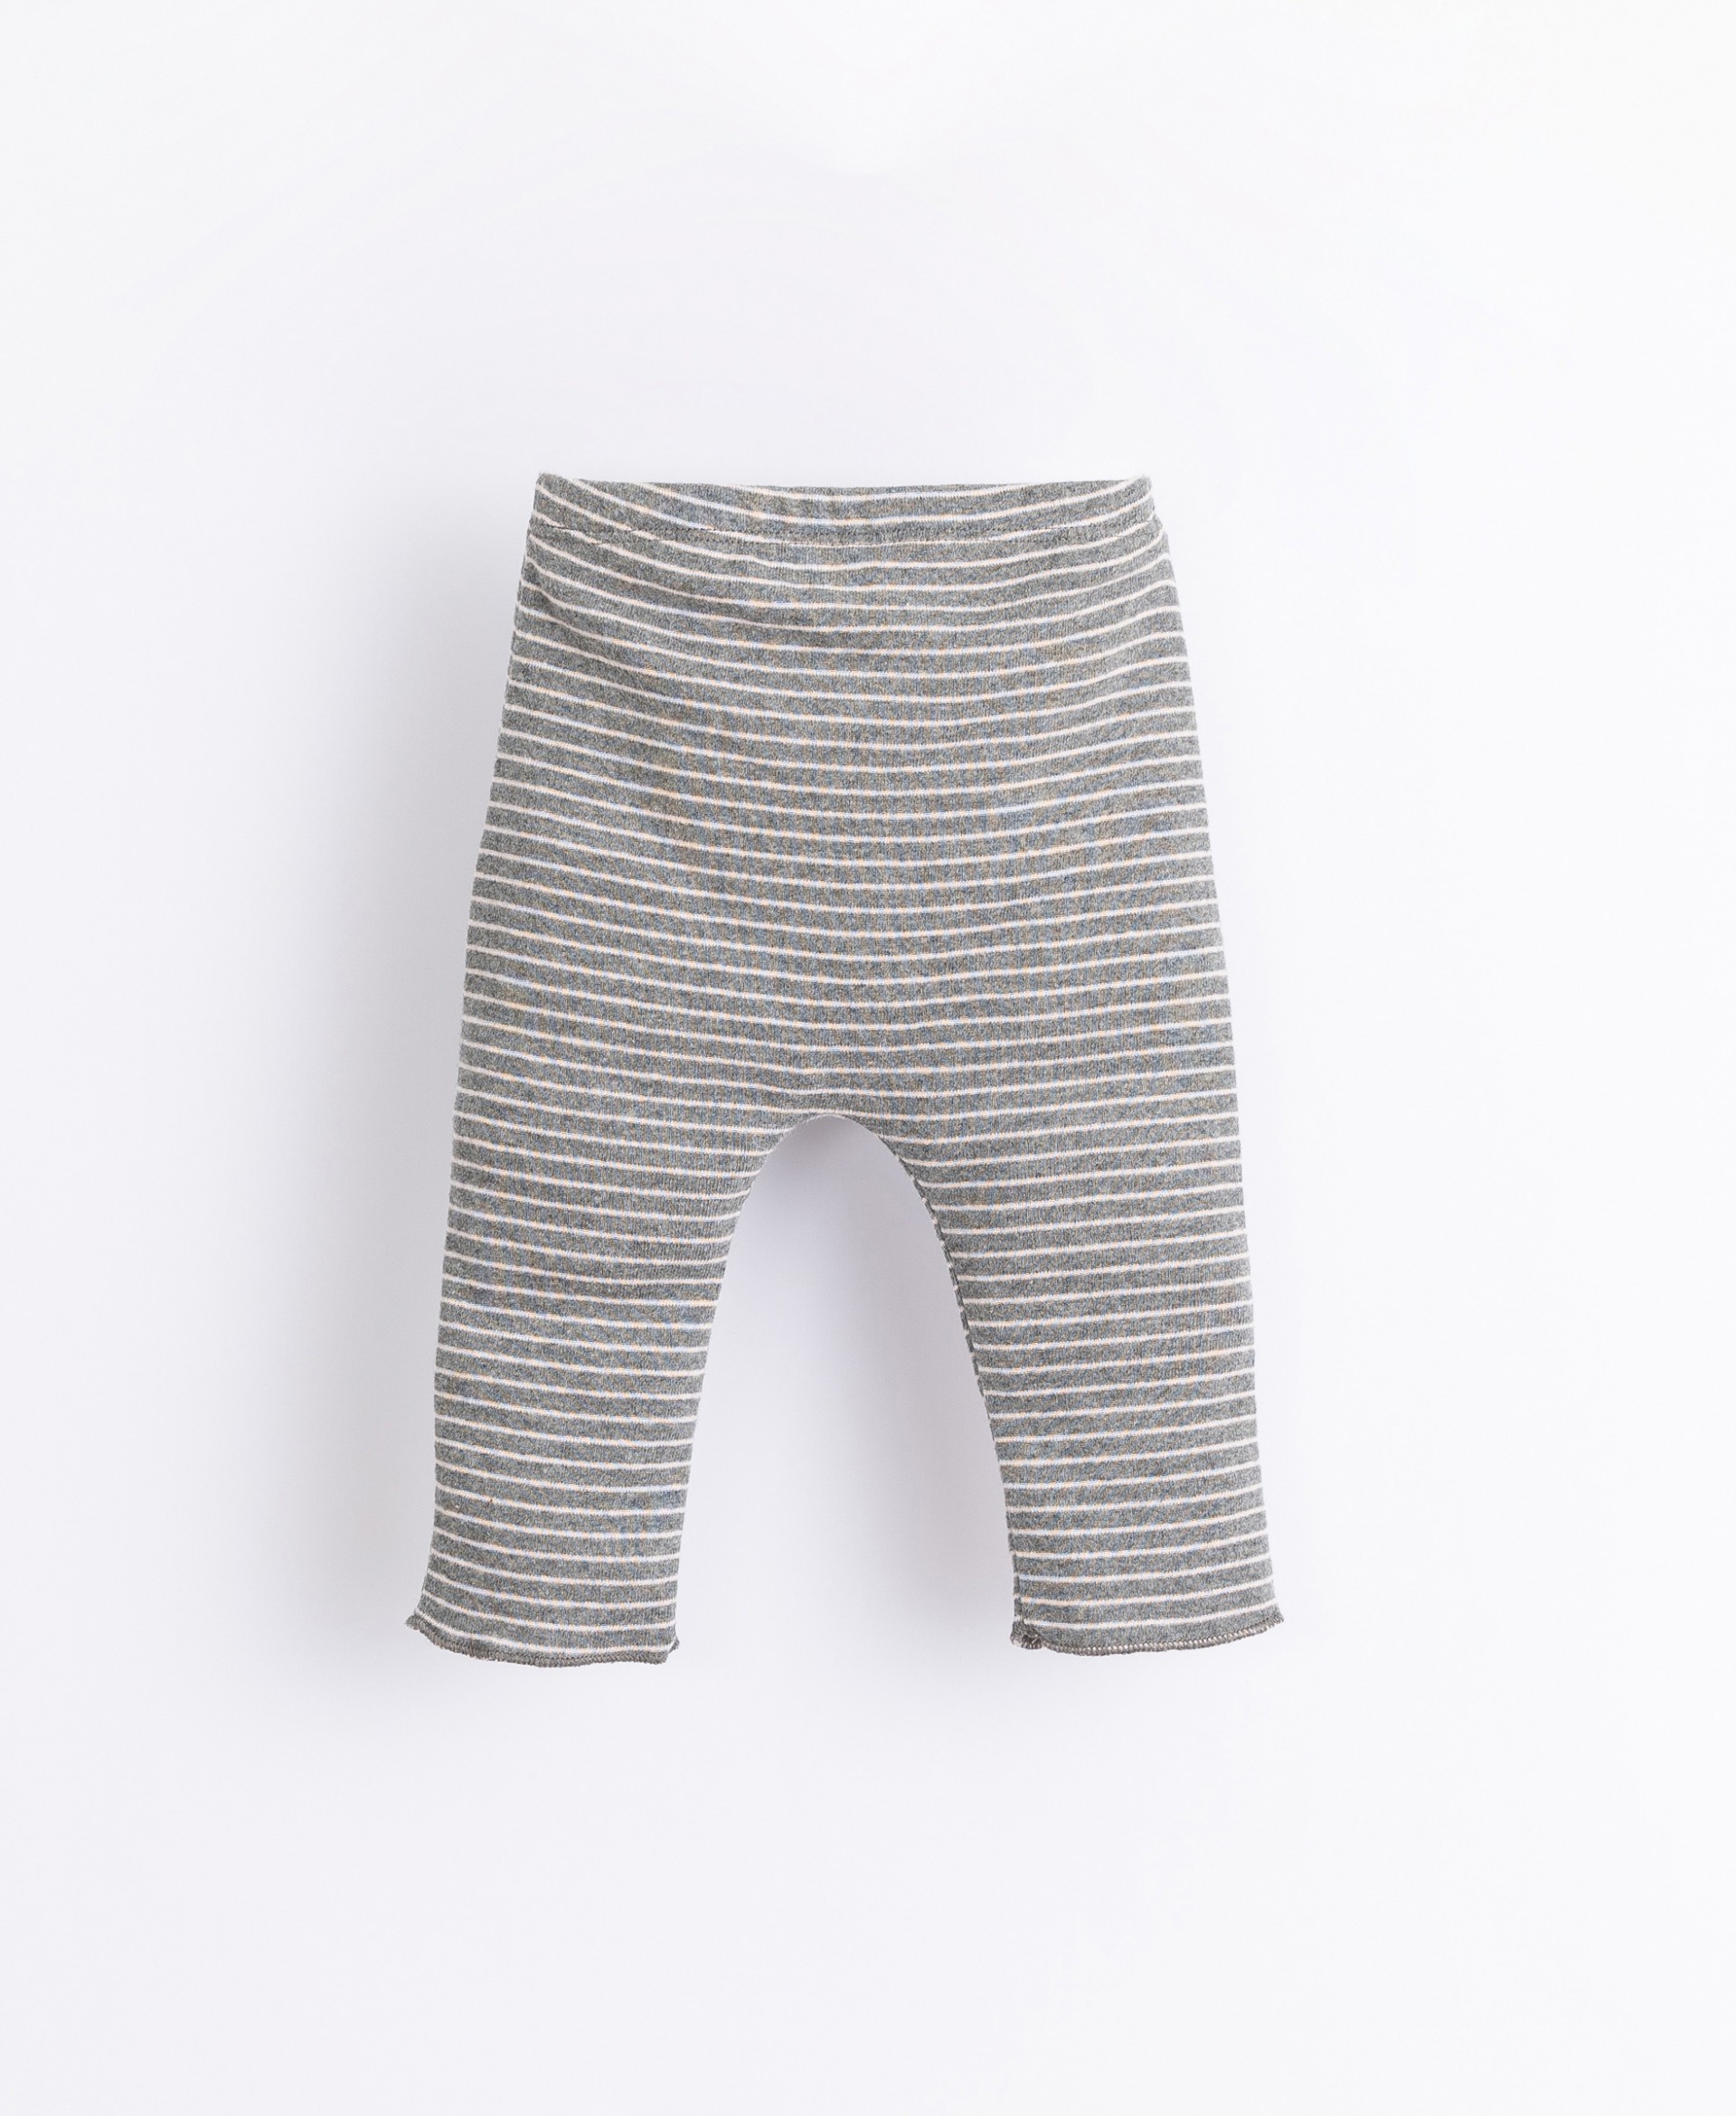 Striped leggings with recycled fibres | Illustration